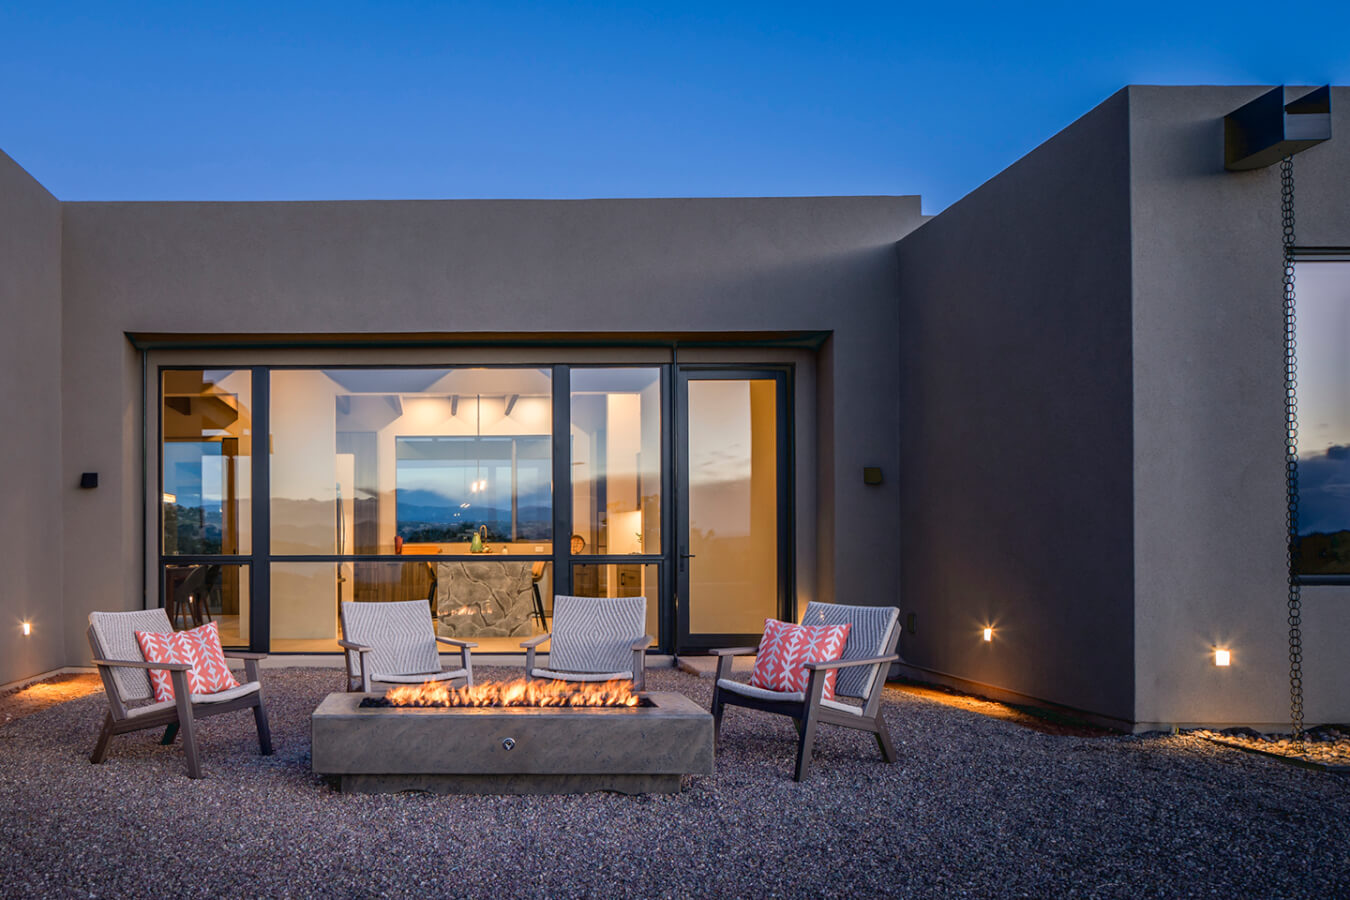 A modern home with a fire pit in the backyard, designed by a Santa Fe architect.